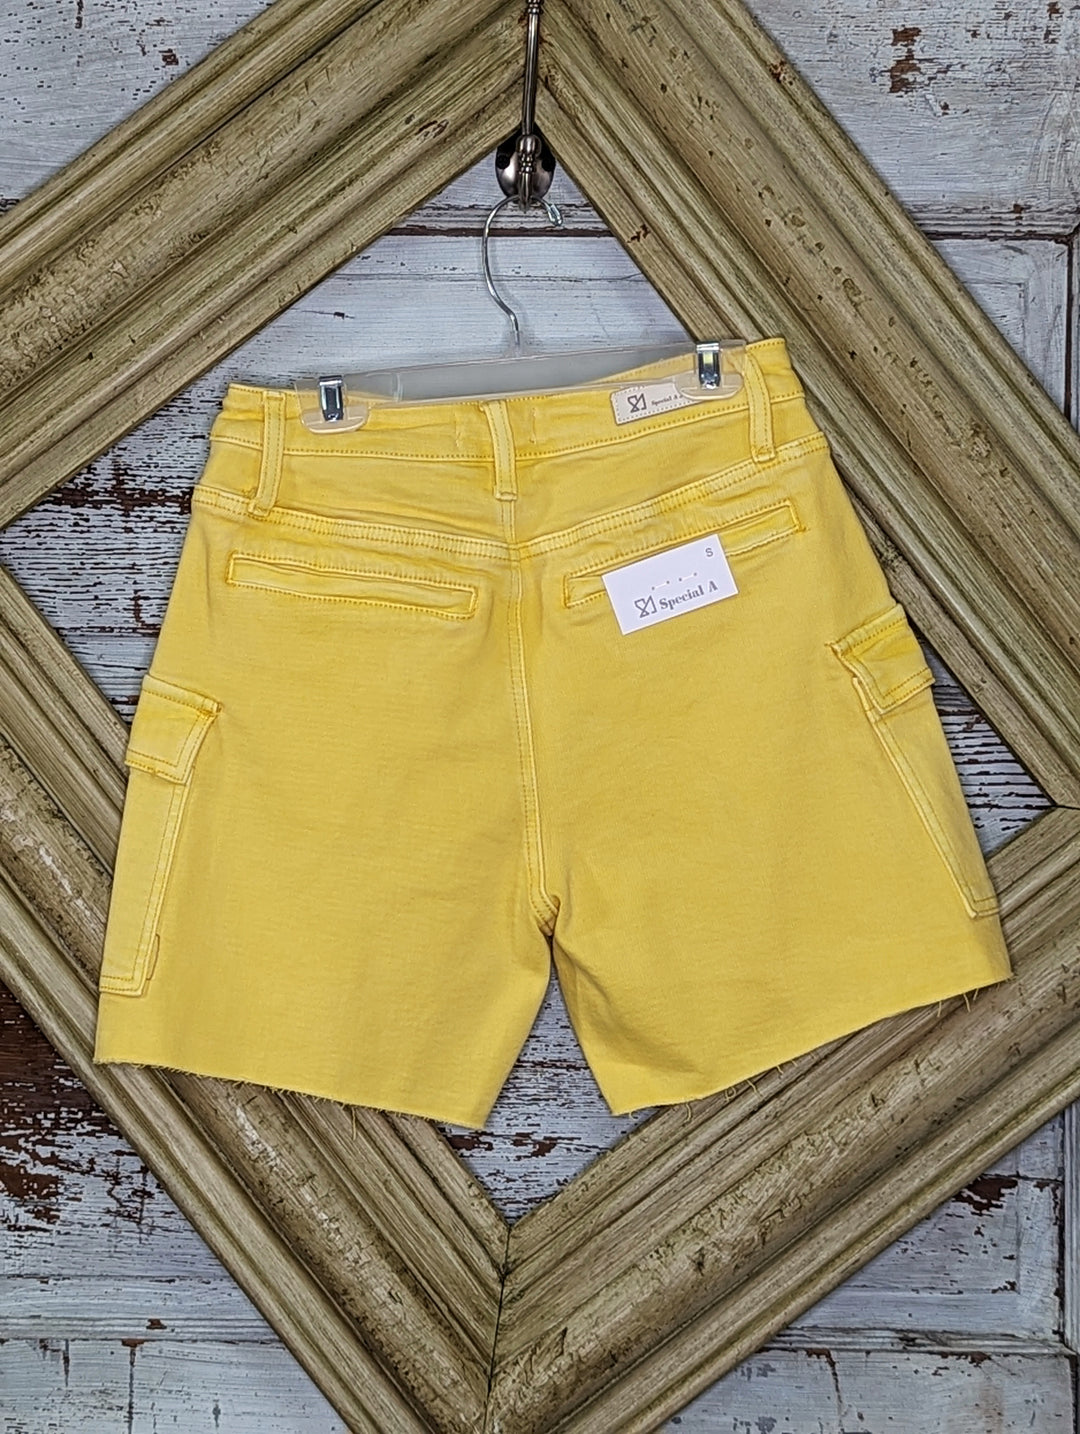 Loose Fit Cargo Shorts